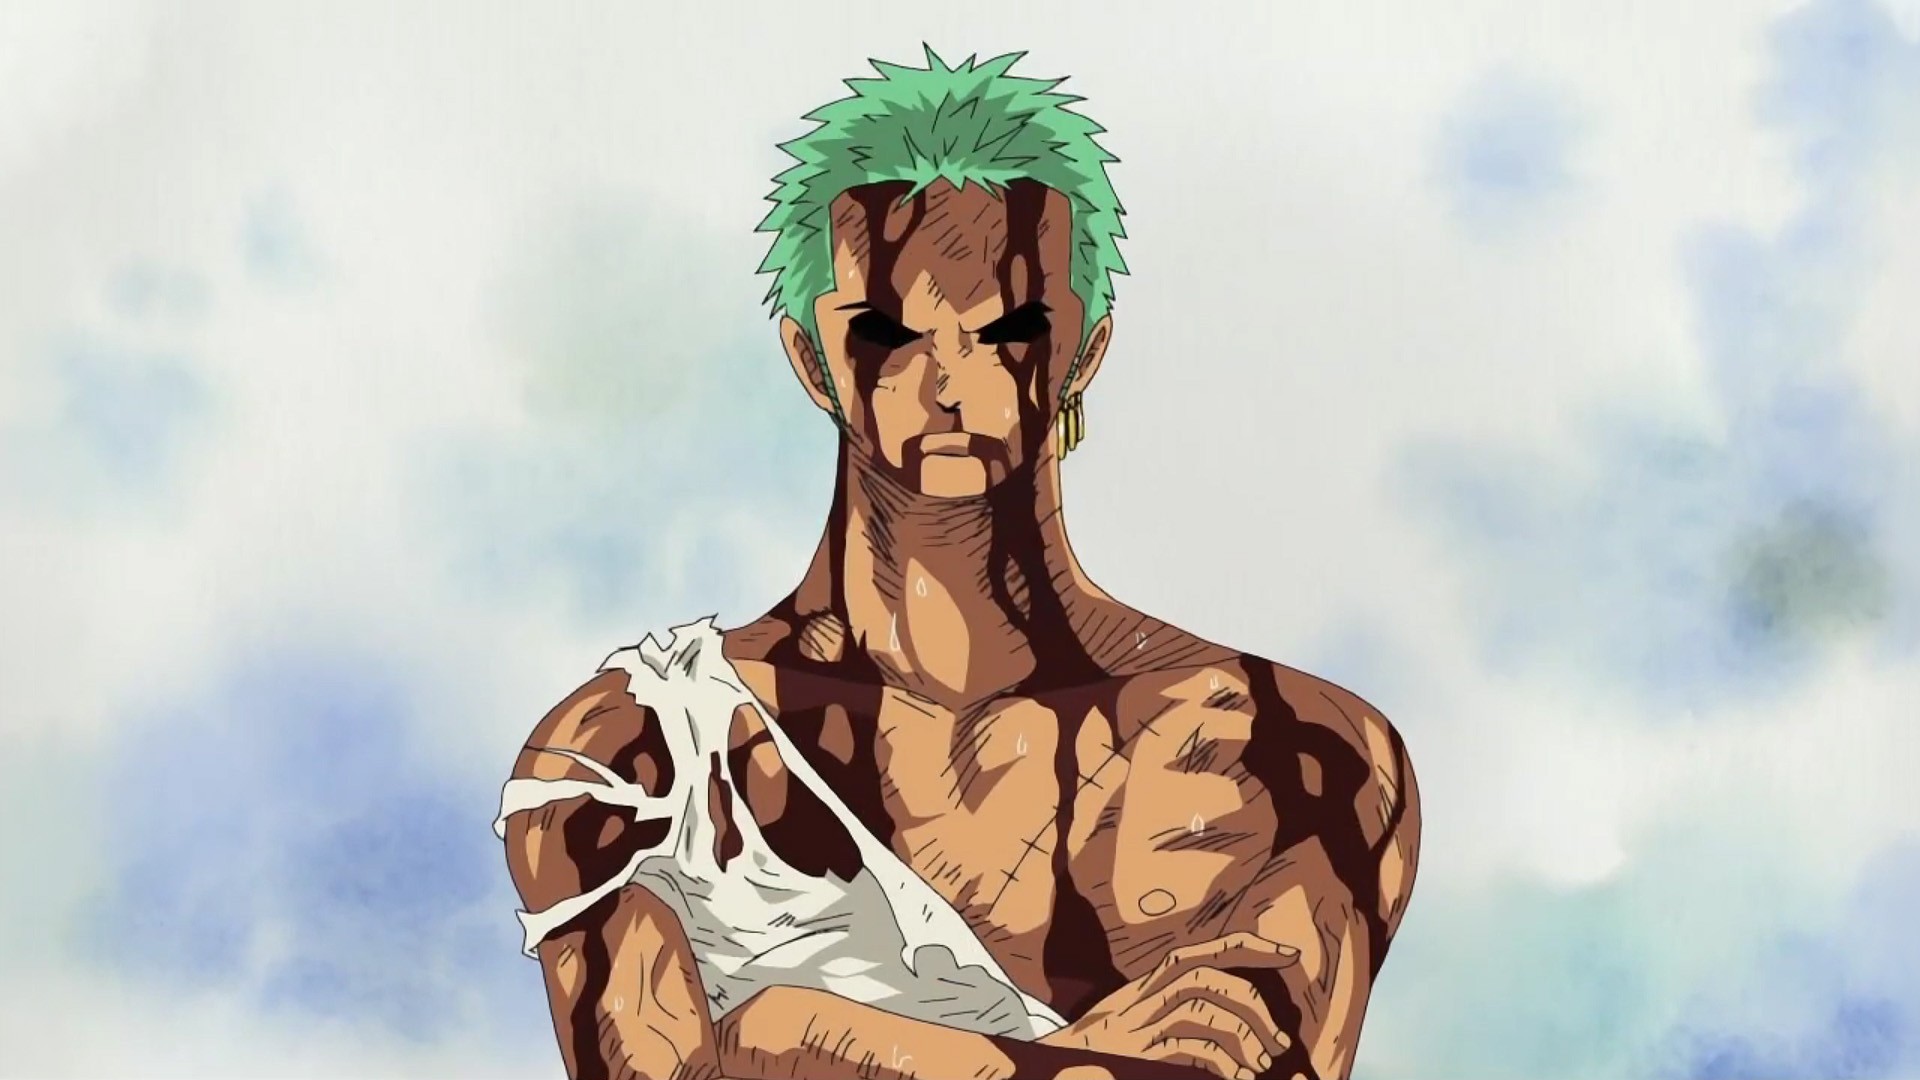 Anime 1920x1080 One Piece Roronoa Zoro anime anime screenshot anime boys green hair simple background blood earring black eyes closed mouth frown muscles arms crossed sweat